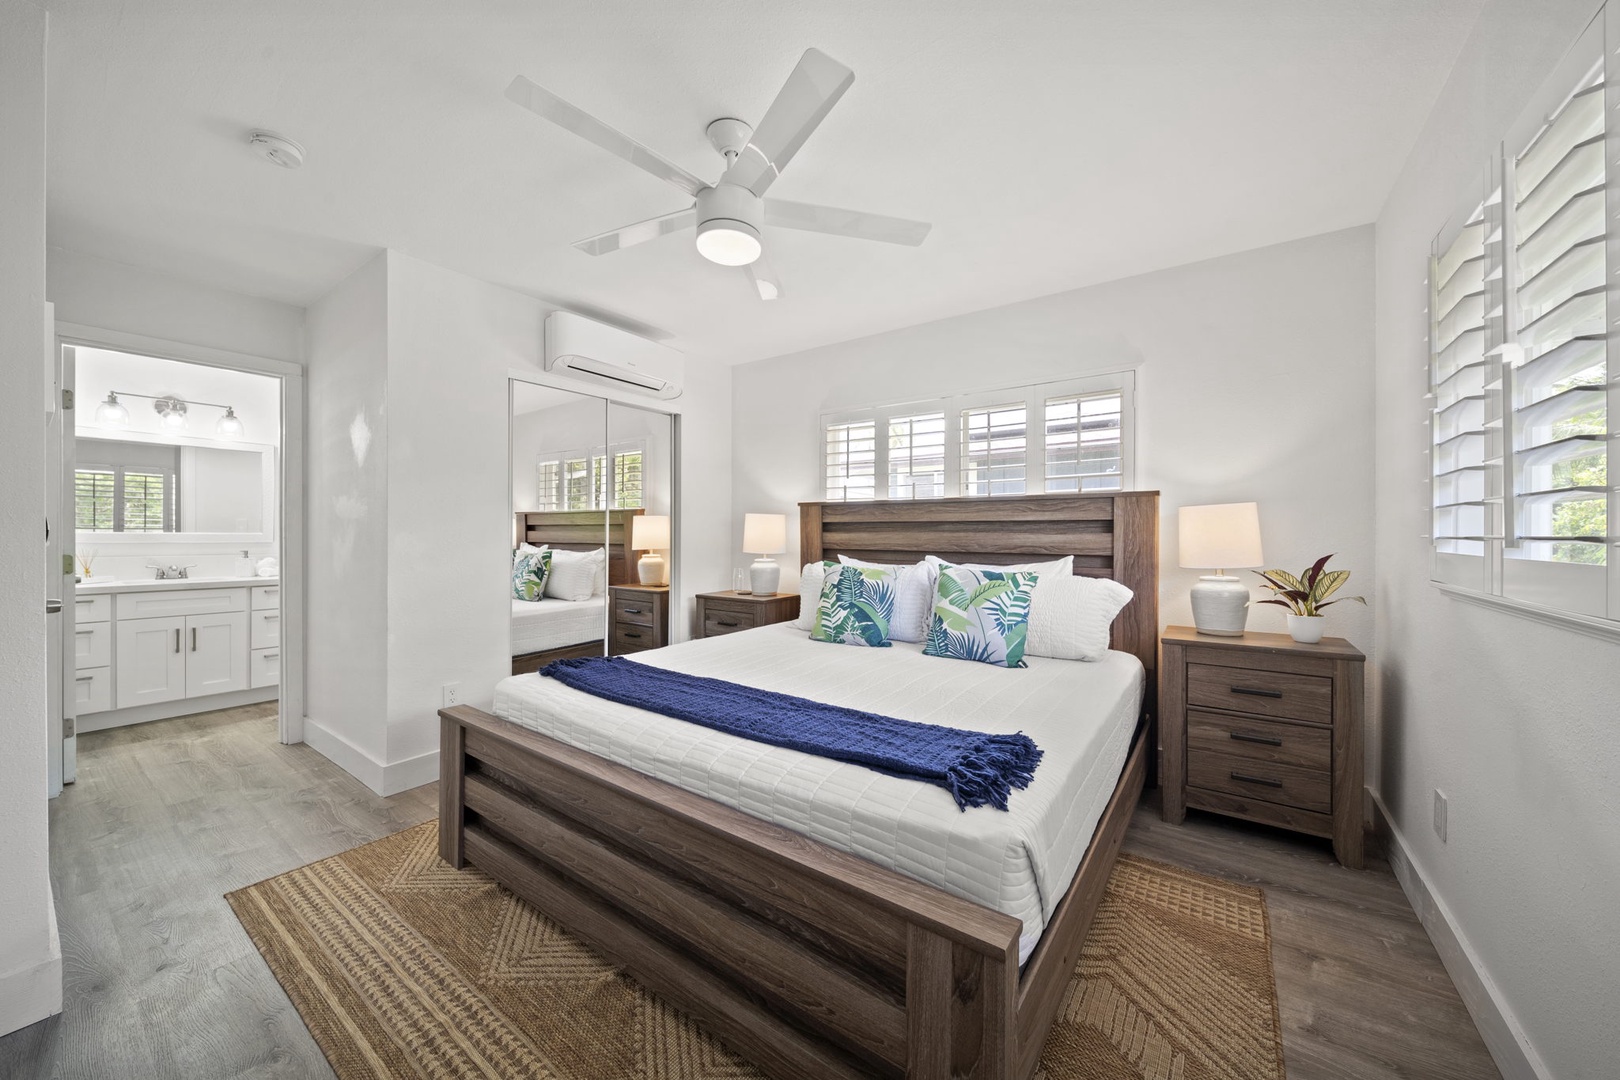 Haleiwa Vacation Rentals, Hale Nalu - Guest Bedroom 6 is equipped with split A/C and a ceiling fan